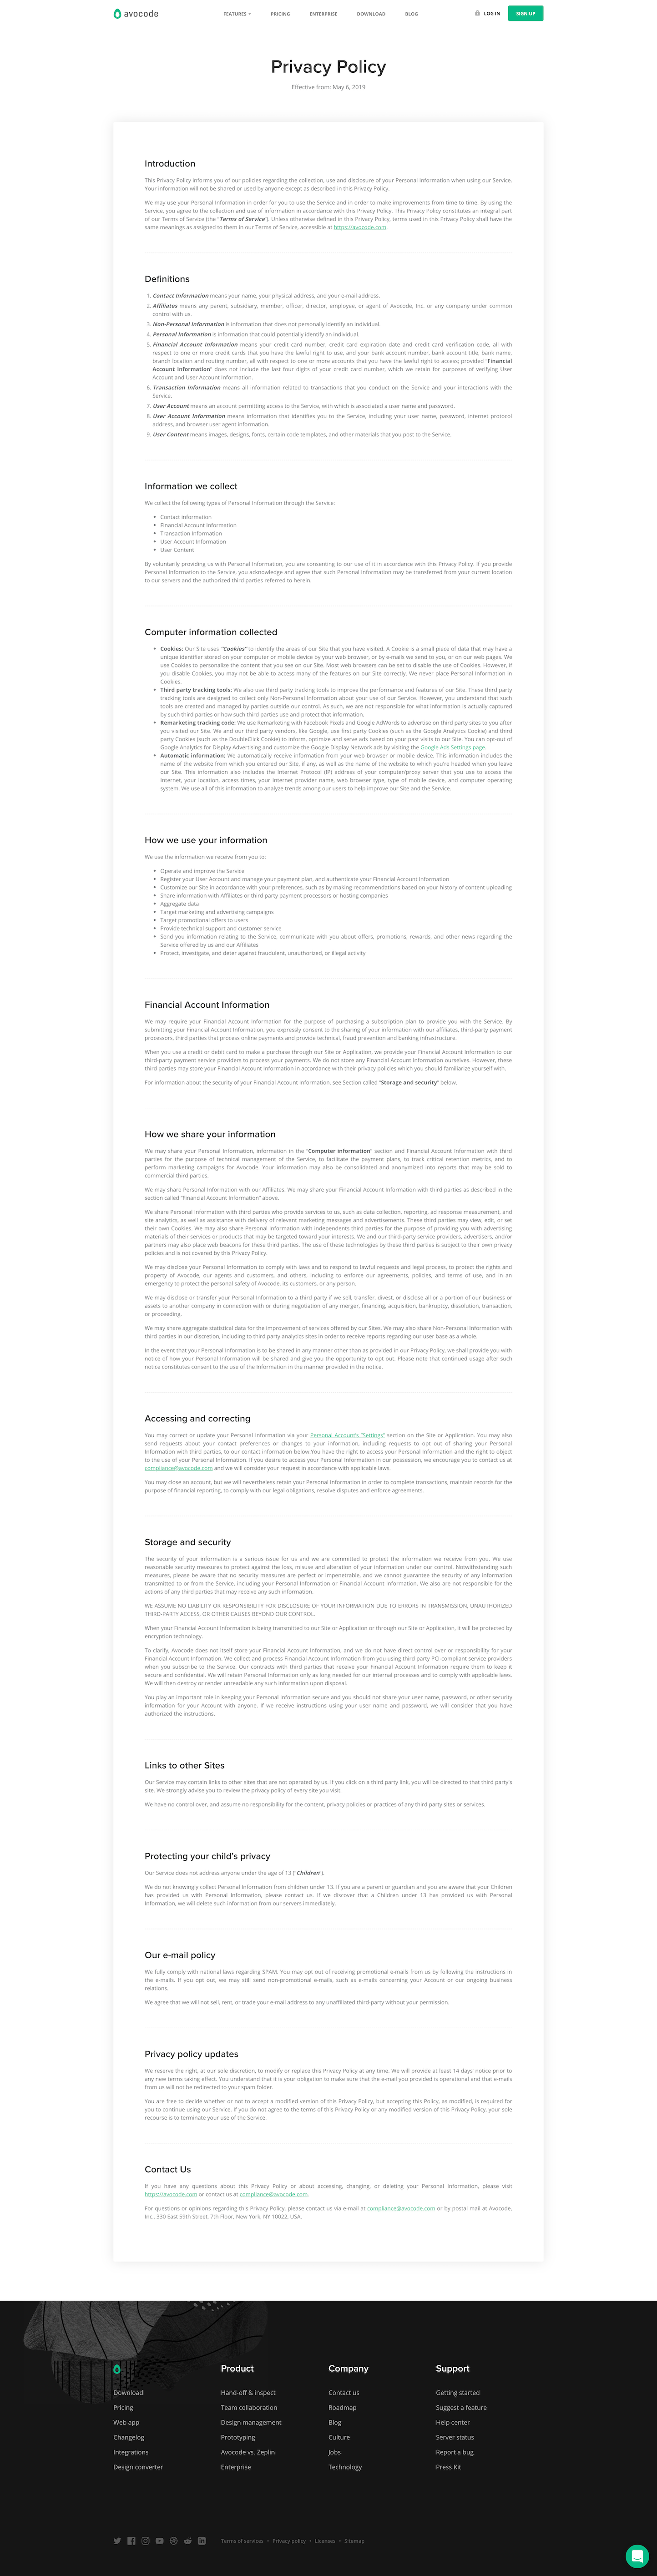 Screenshot of the Privacy Policy page from the Avocode website.